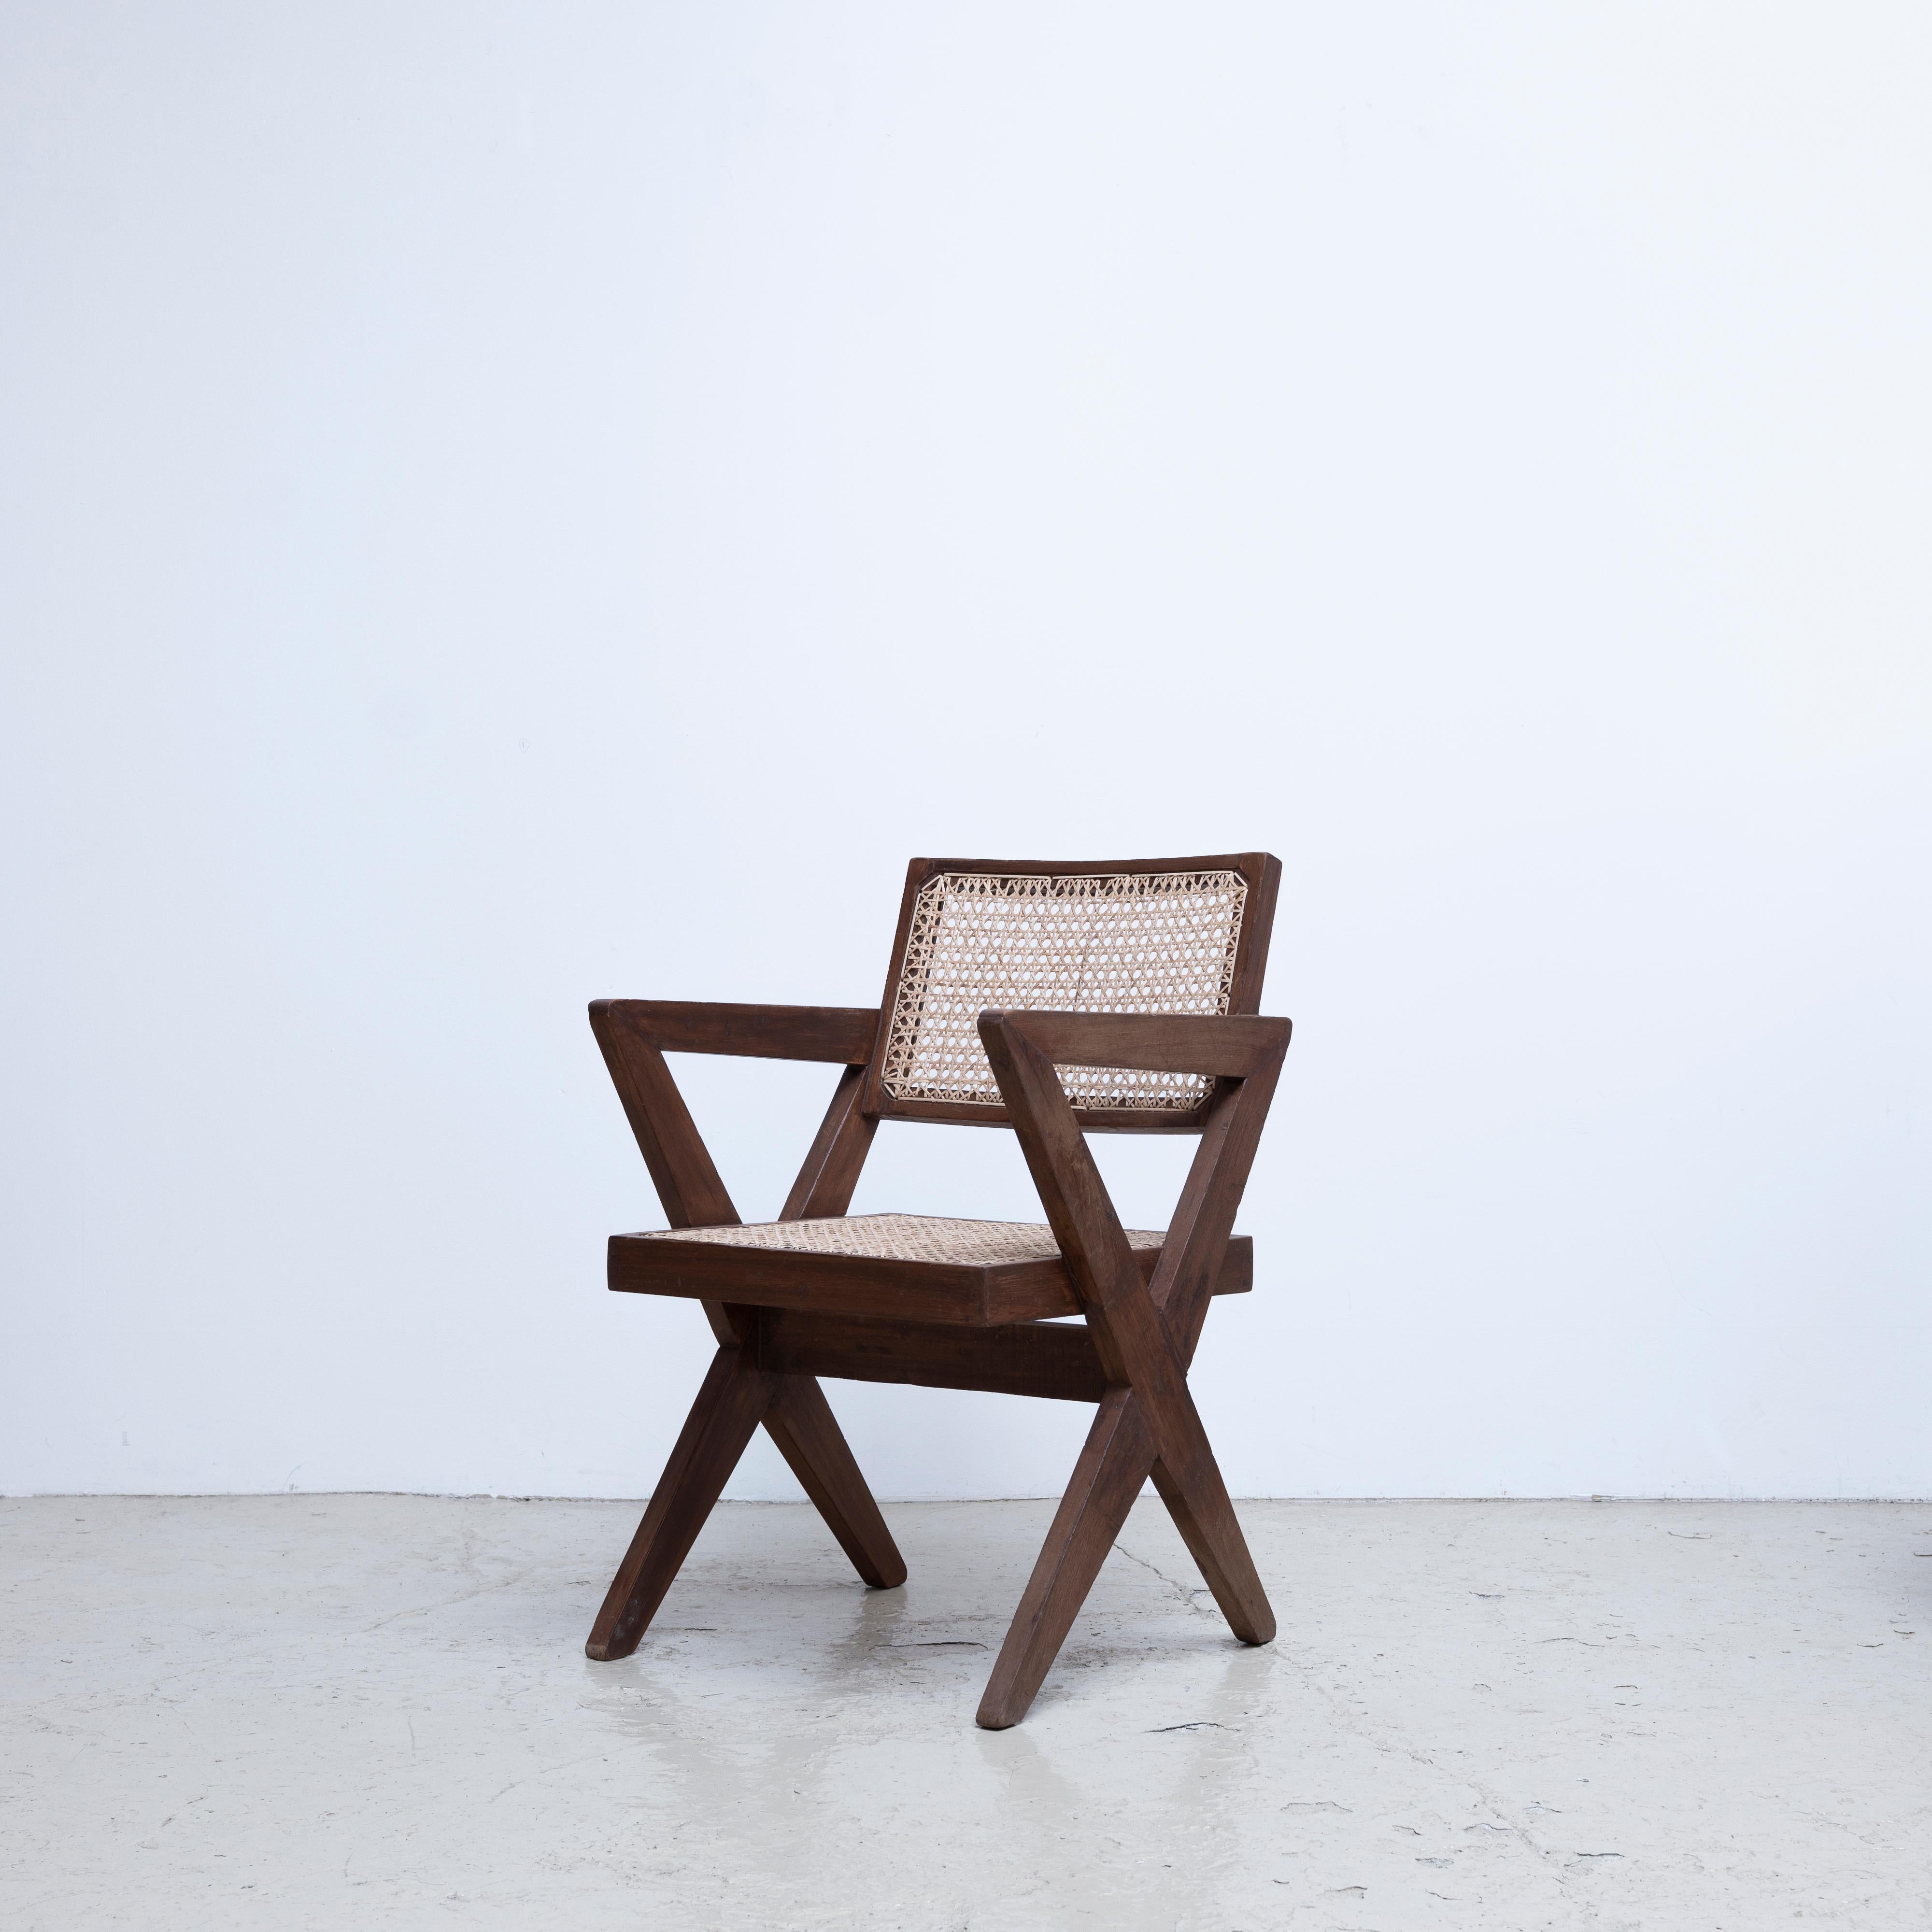 Very rare office chair designed by Pierre Jeanneret for the buildings in Chandigarh in 1960s.
Solid teak wood and cane.
Provenance: D.A.V. College, Chandigarh, India